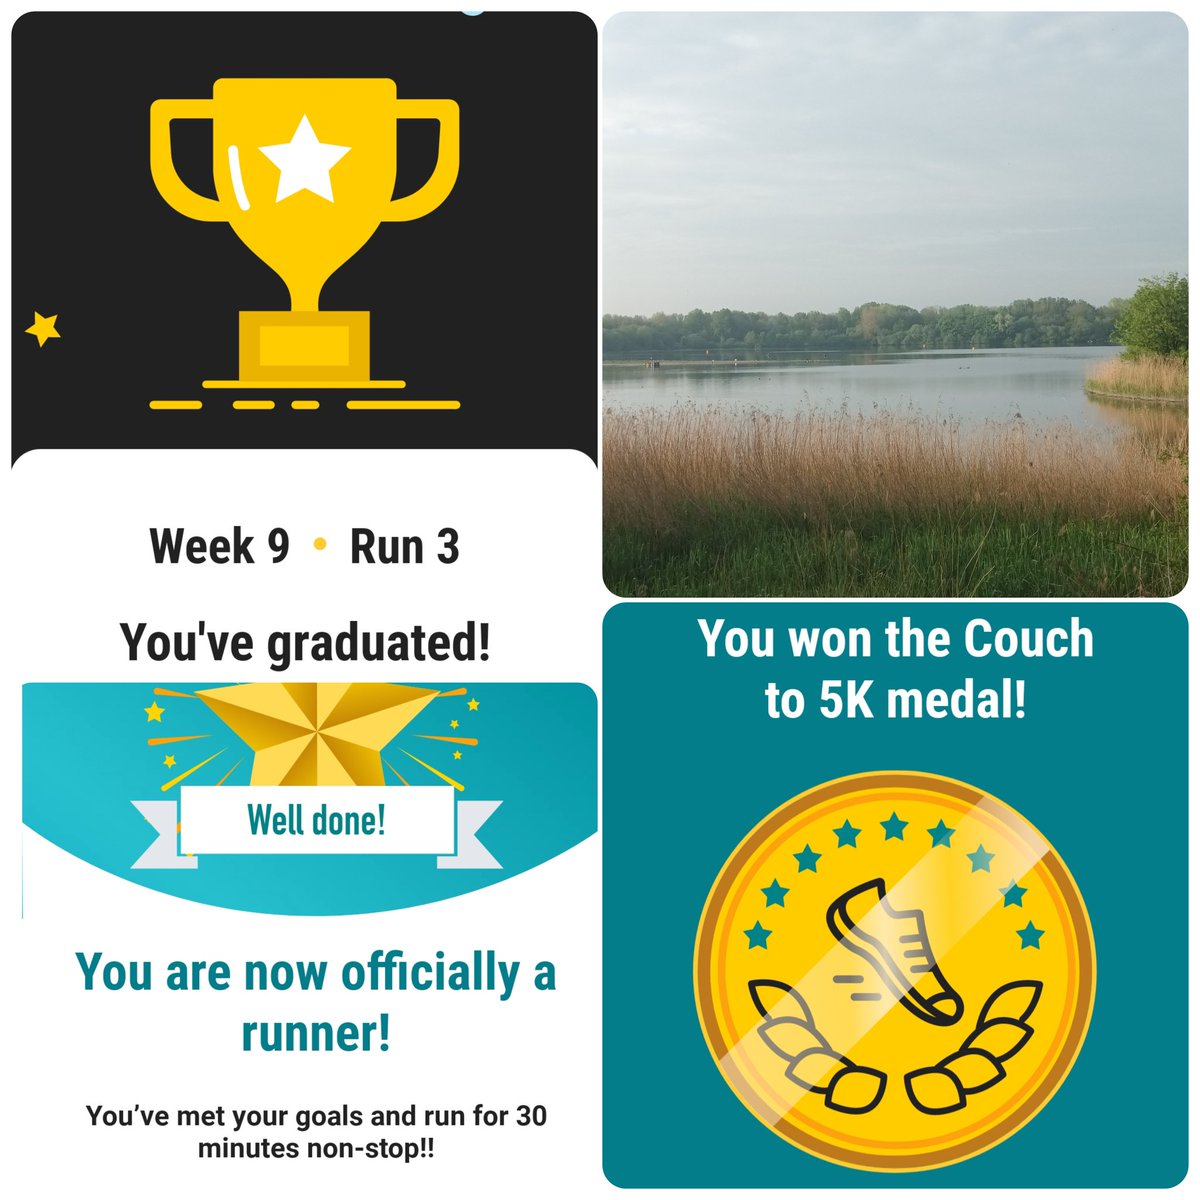 May 9 Slow but sure - getting back to running again and enjoying it in beautiful surroundings 

#C25K #ThankYouNHS #running #boatsthattweet #boatlife